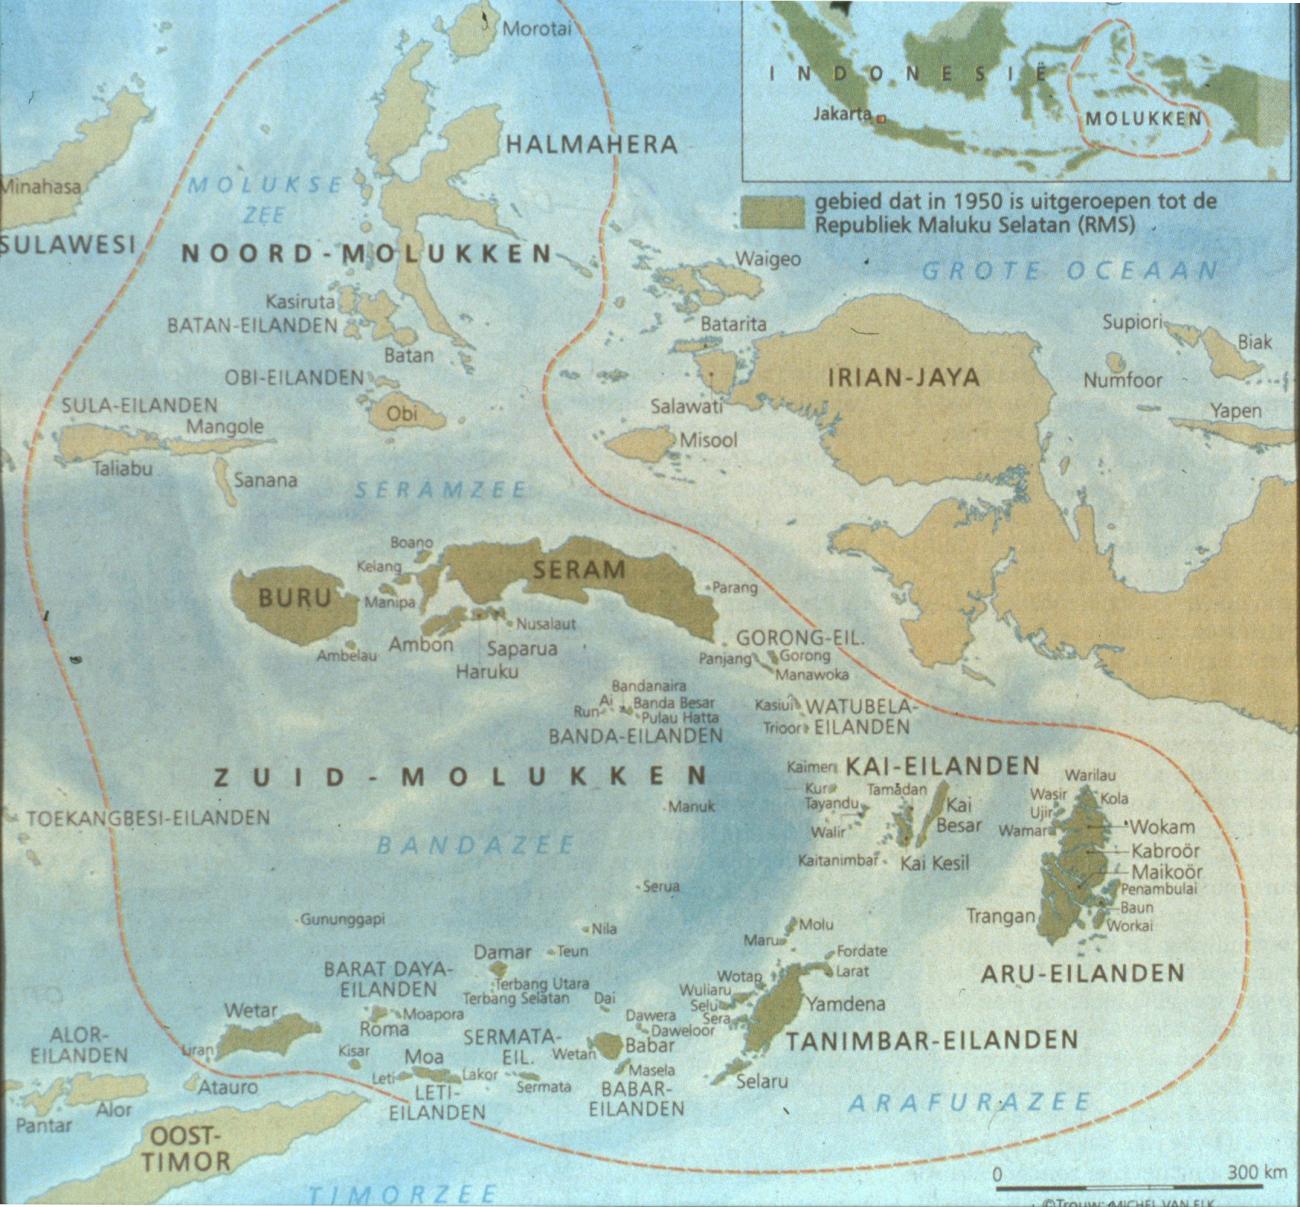 BD/67/149 - 
Map of the Republic of South Moluccas
